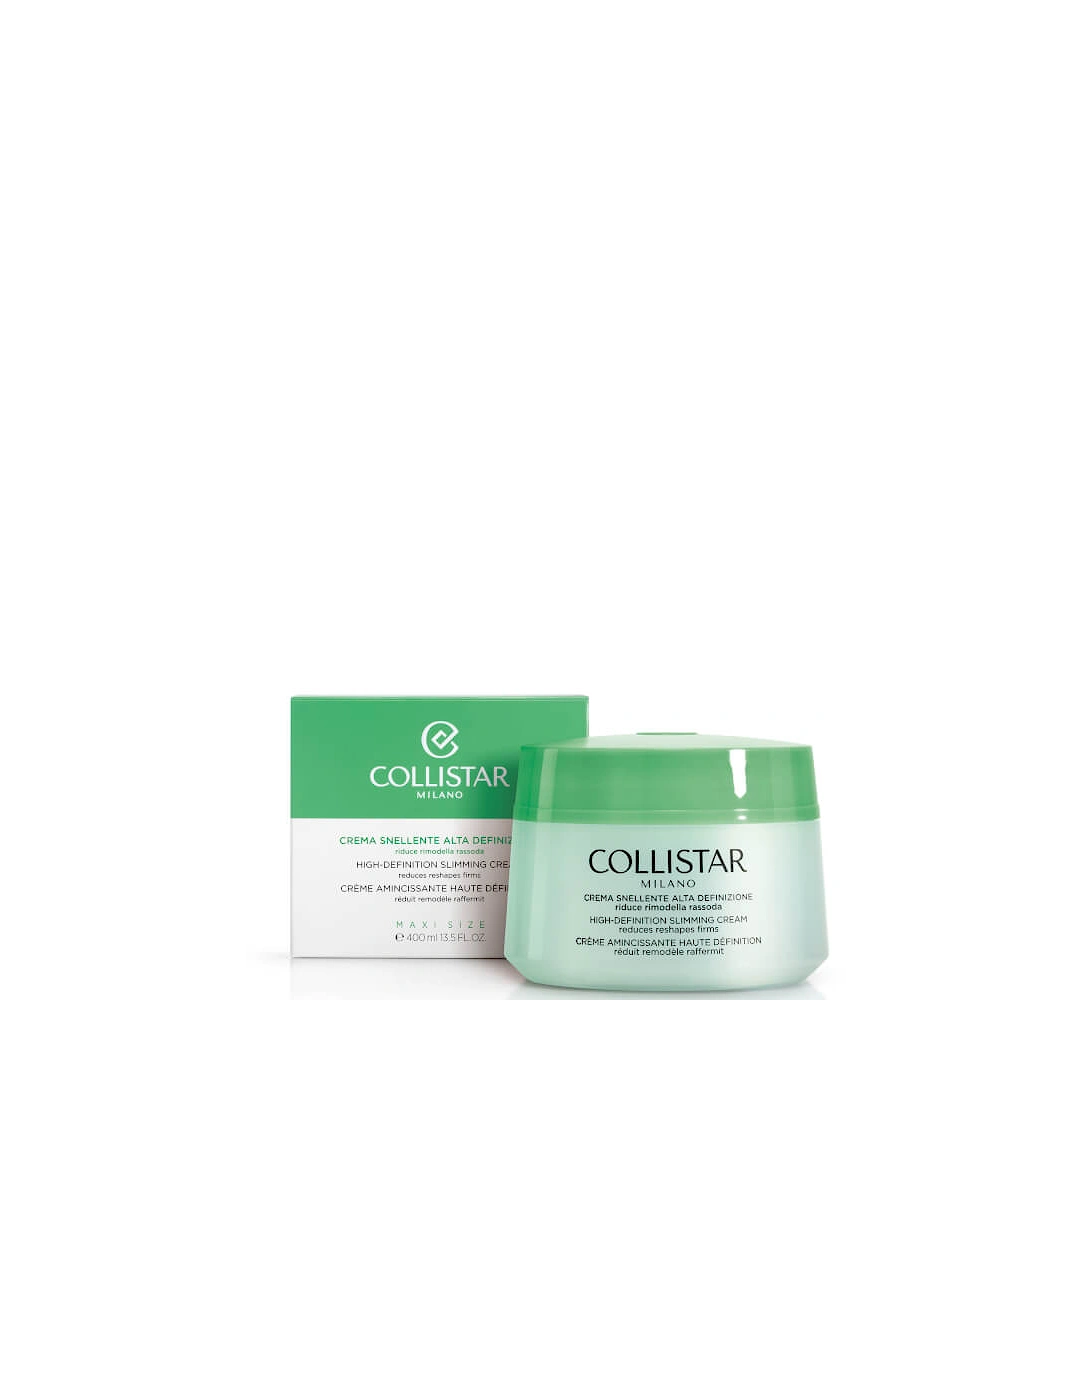 High-Definition Slimming Cream Reduces Reshapes Firms 400ml, 2 of 1